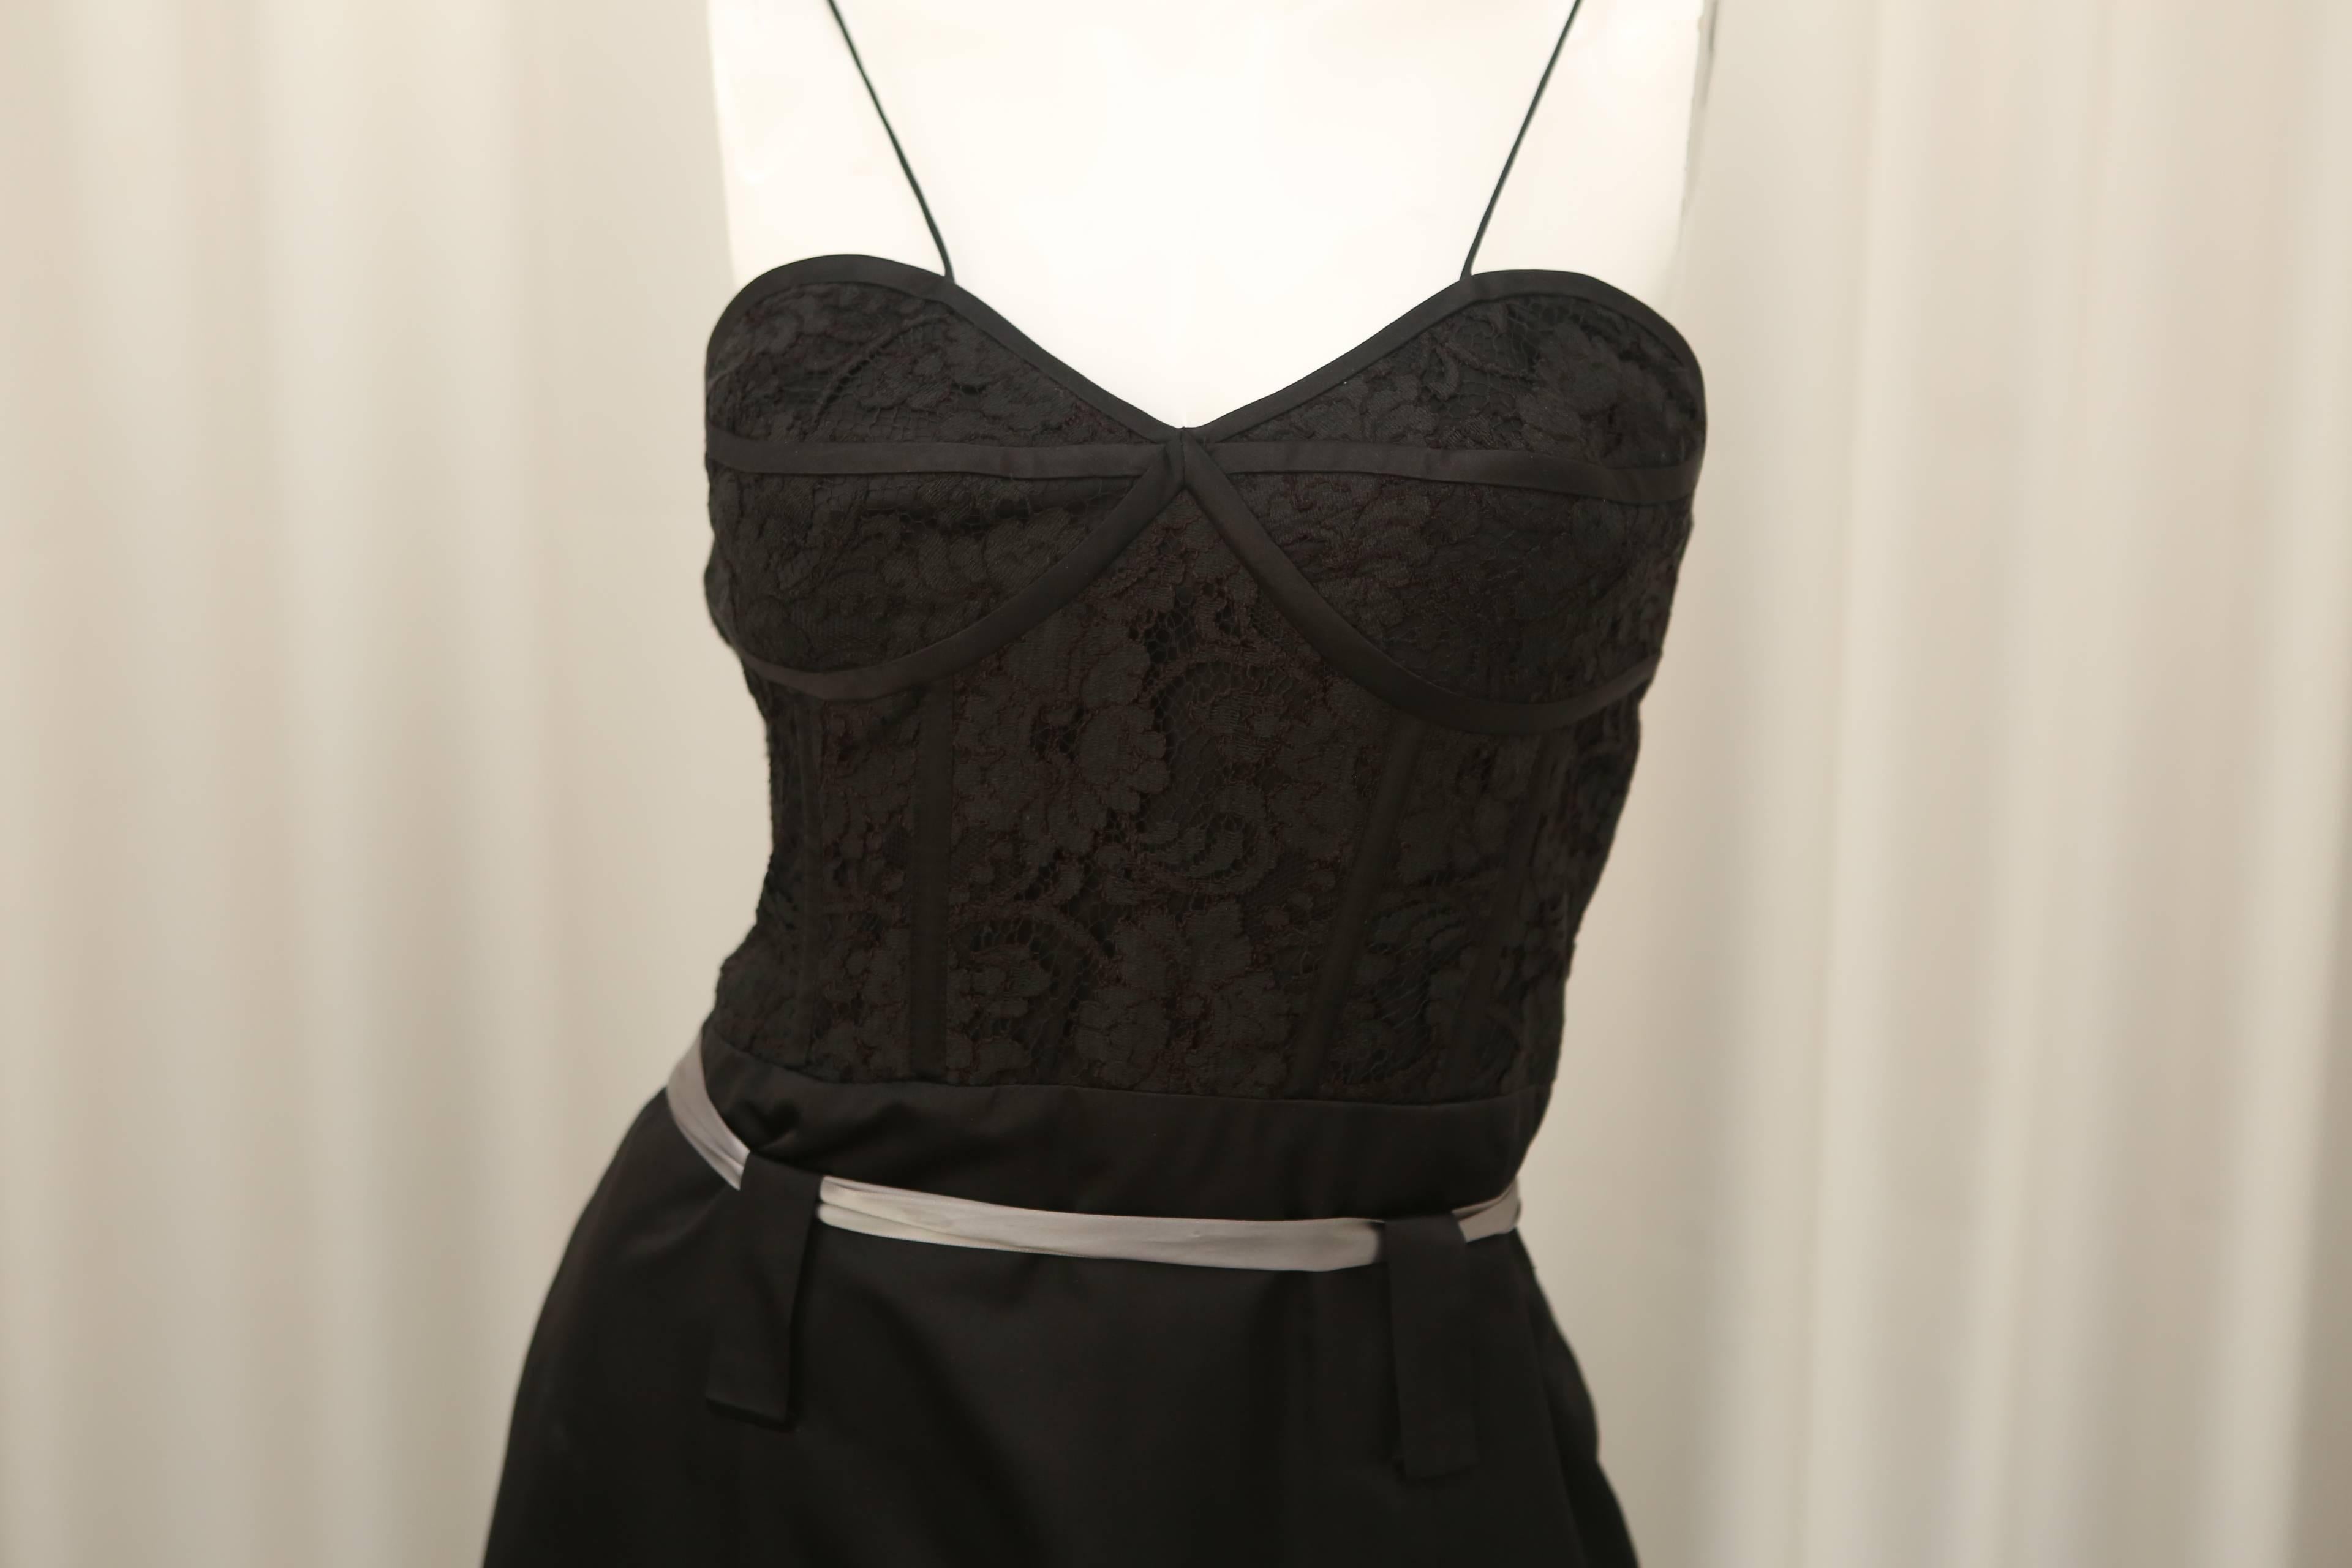 Yigal Azrouel black gown with thin straps, lace detail at bodice and grey satin belt.  New W/ Tags.